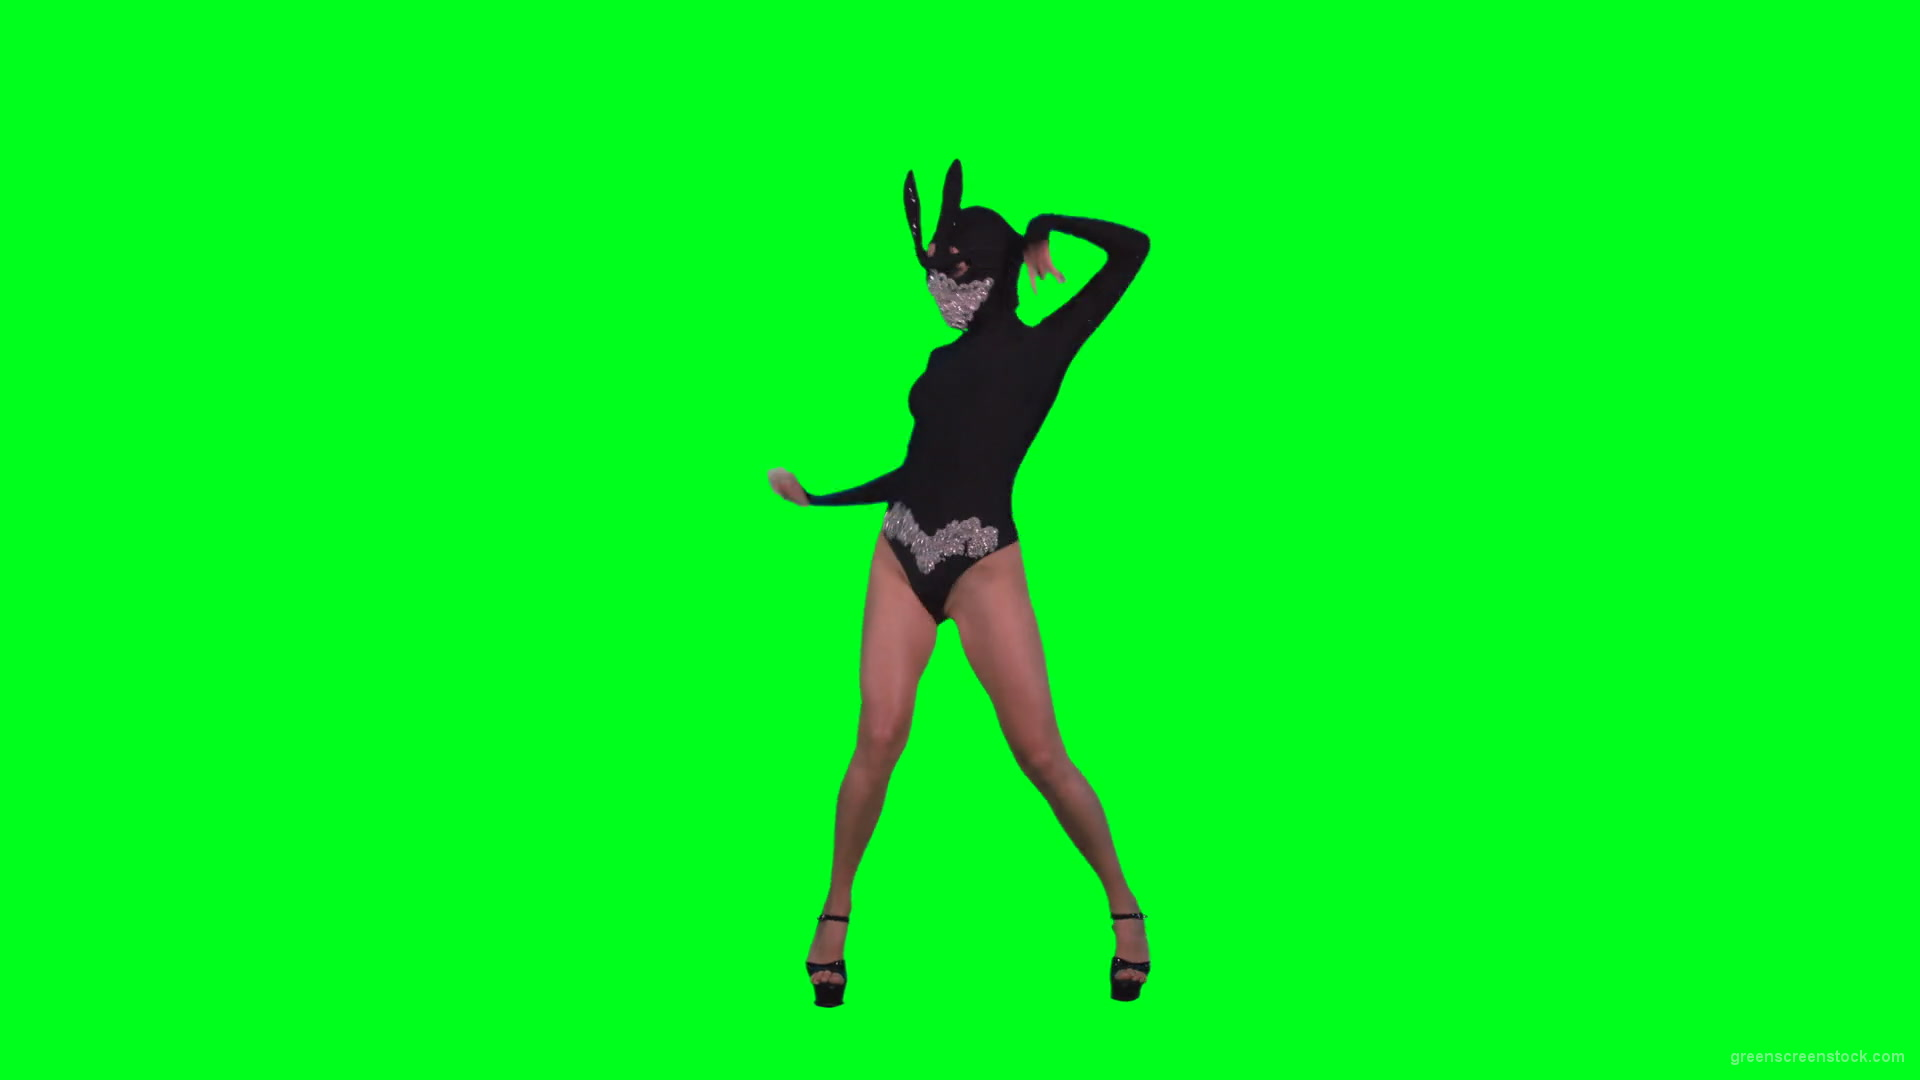 Amazing-black-banny-rabbit-girl-dancing-go-go-isolated-on-green-screen-RAVE-Video-Footage-1920_006 Green Screen Stock